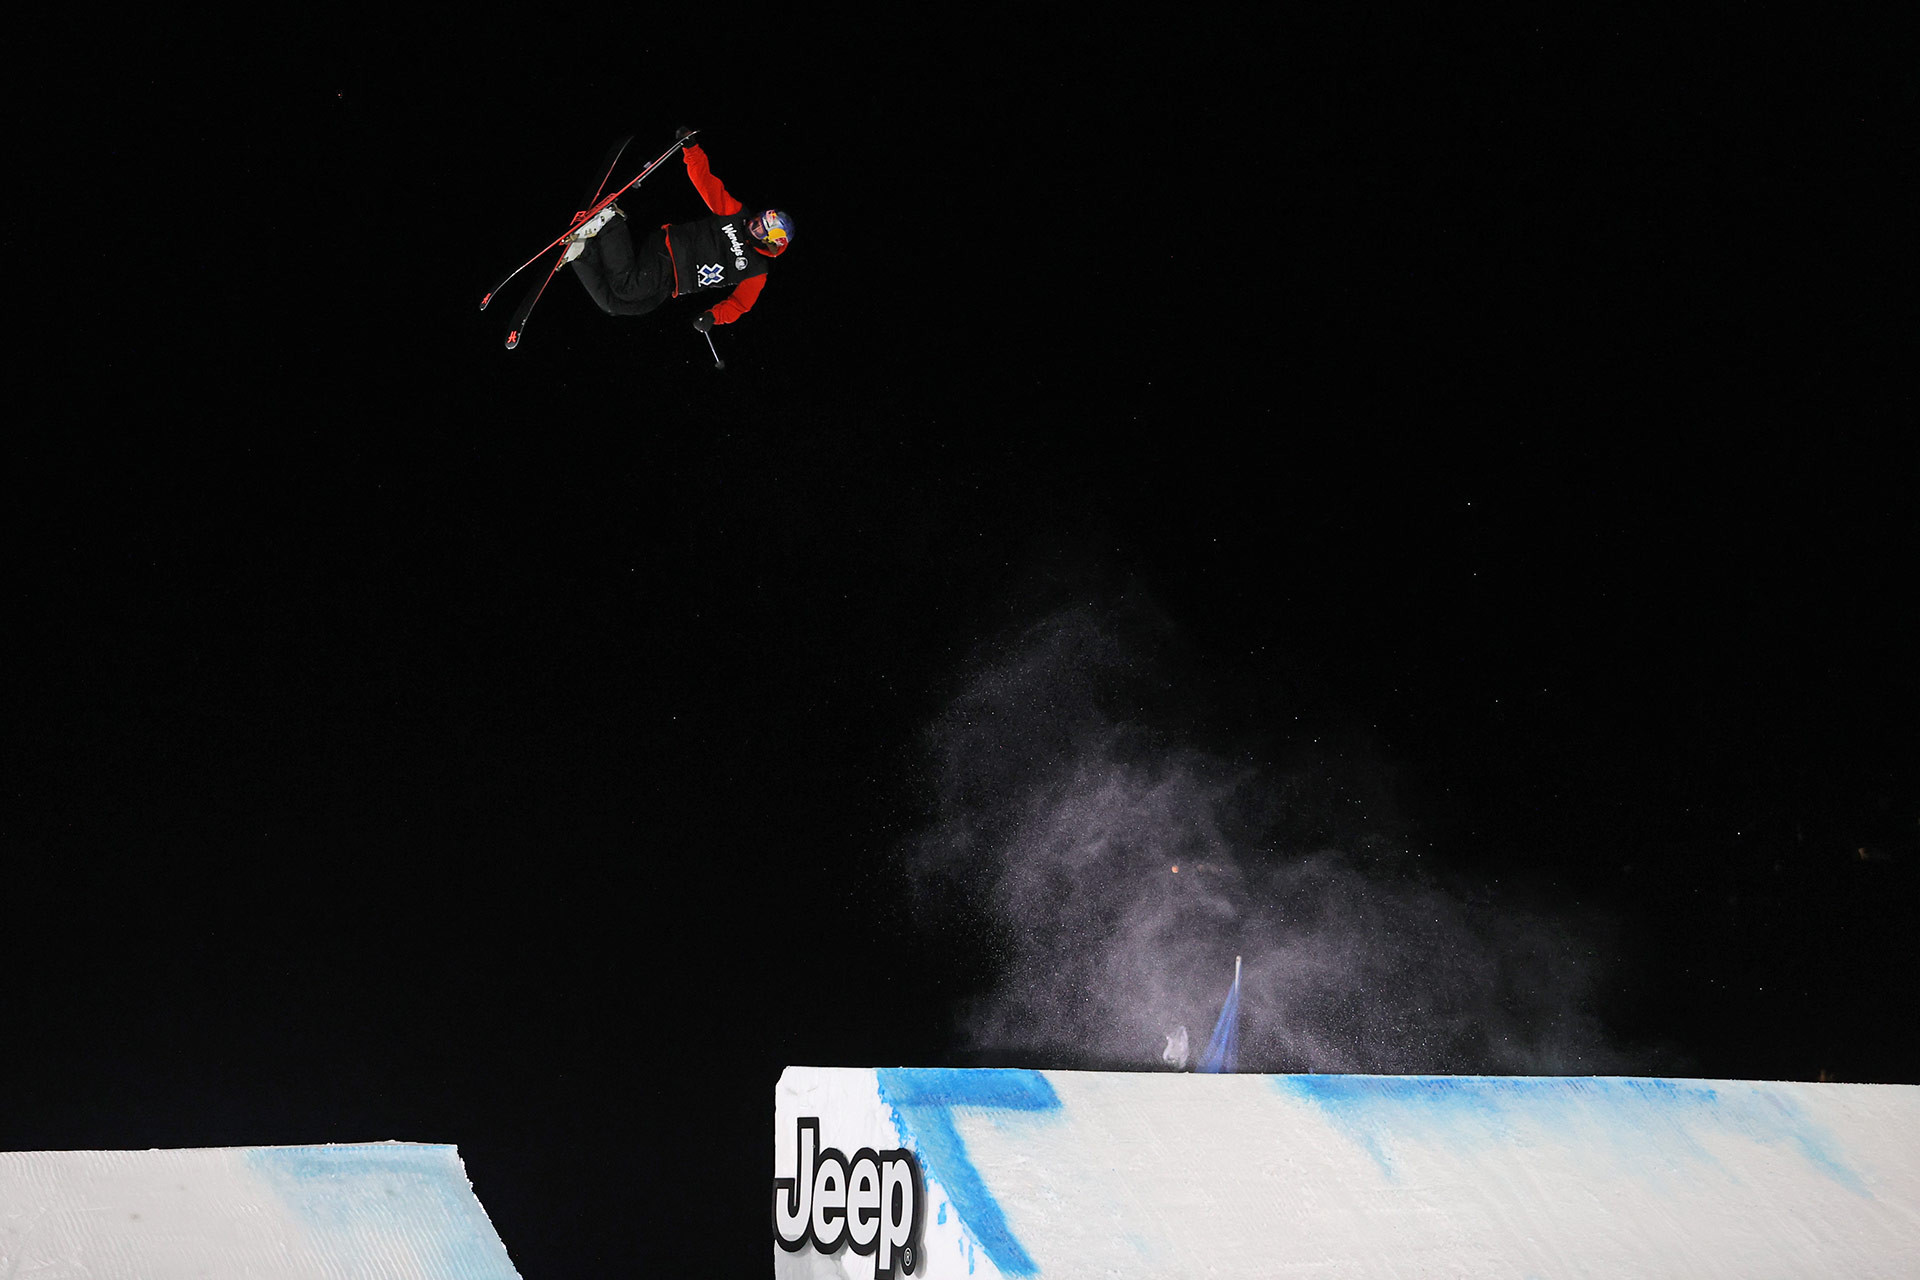 Mac Forehand competes at the 2022 Winter X Games Men's Big Air